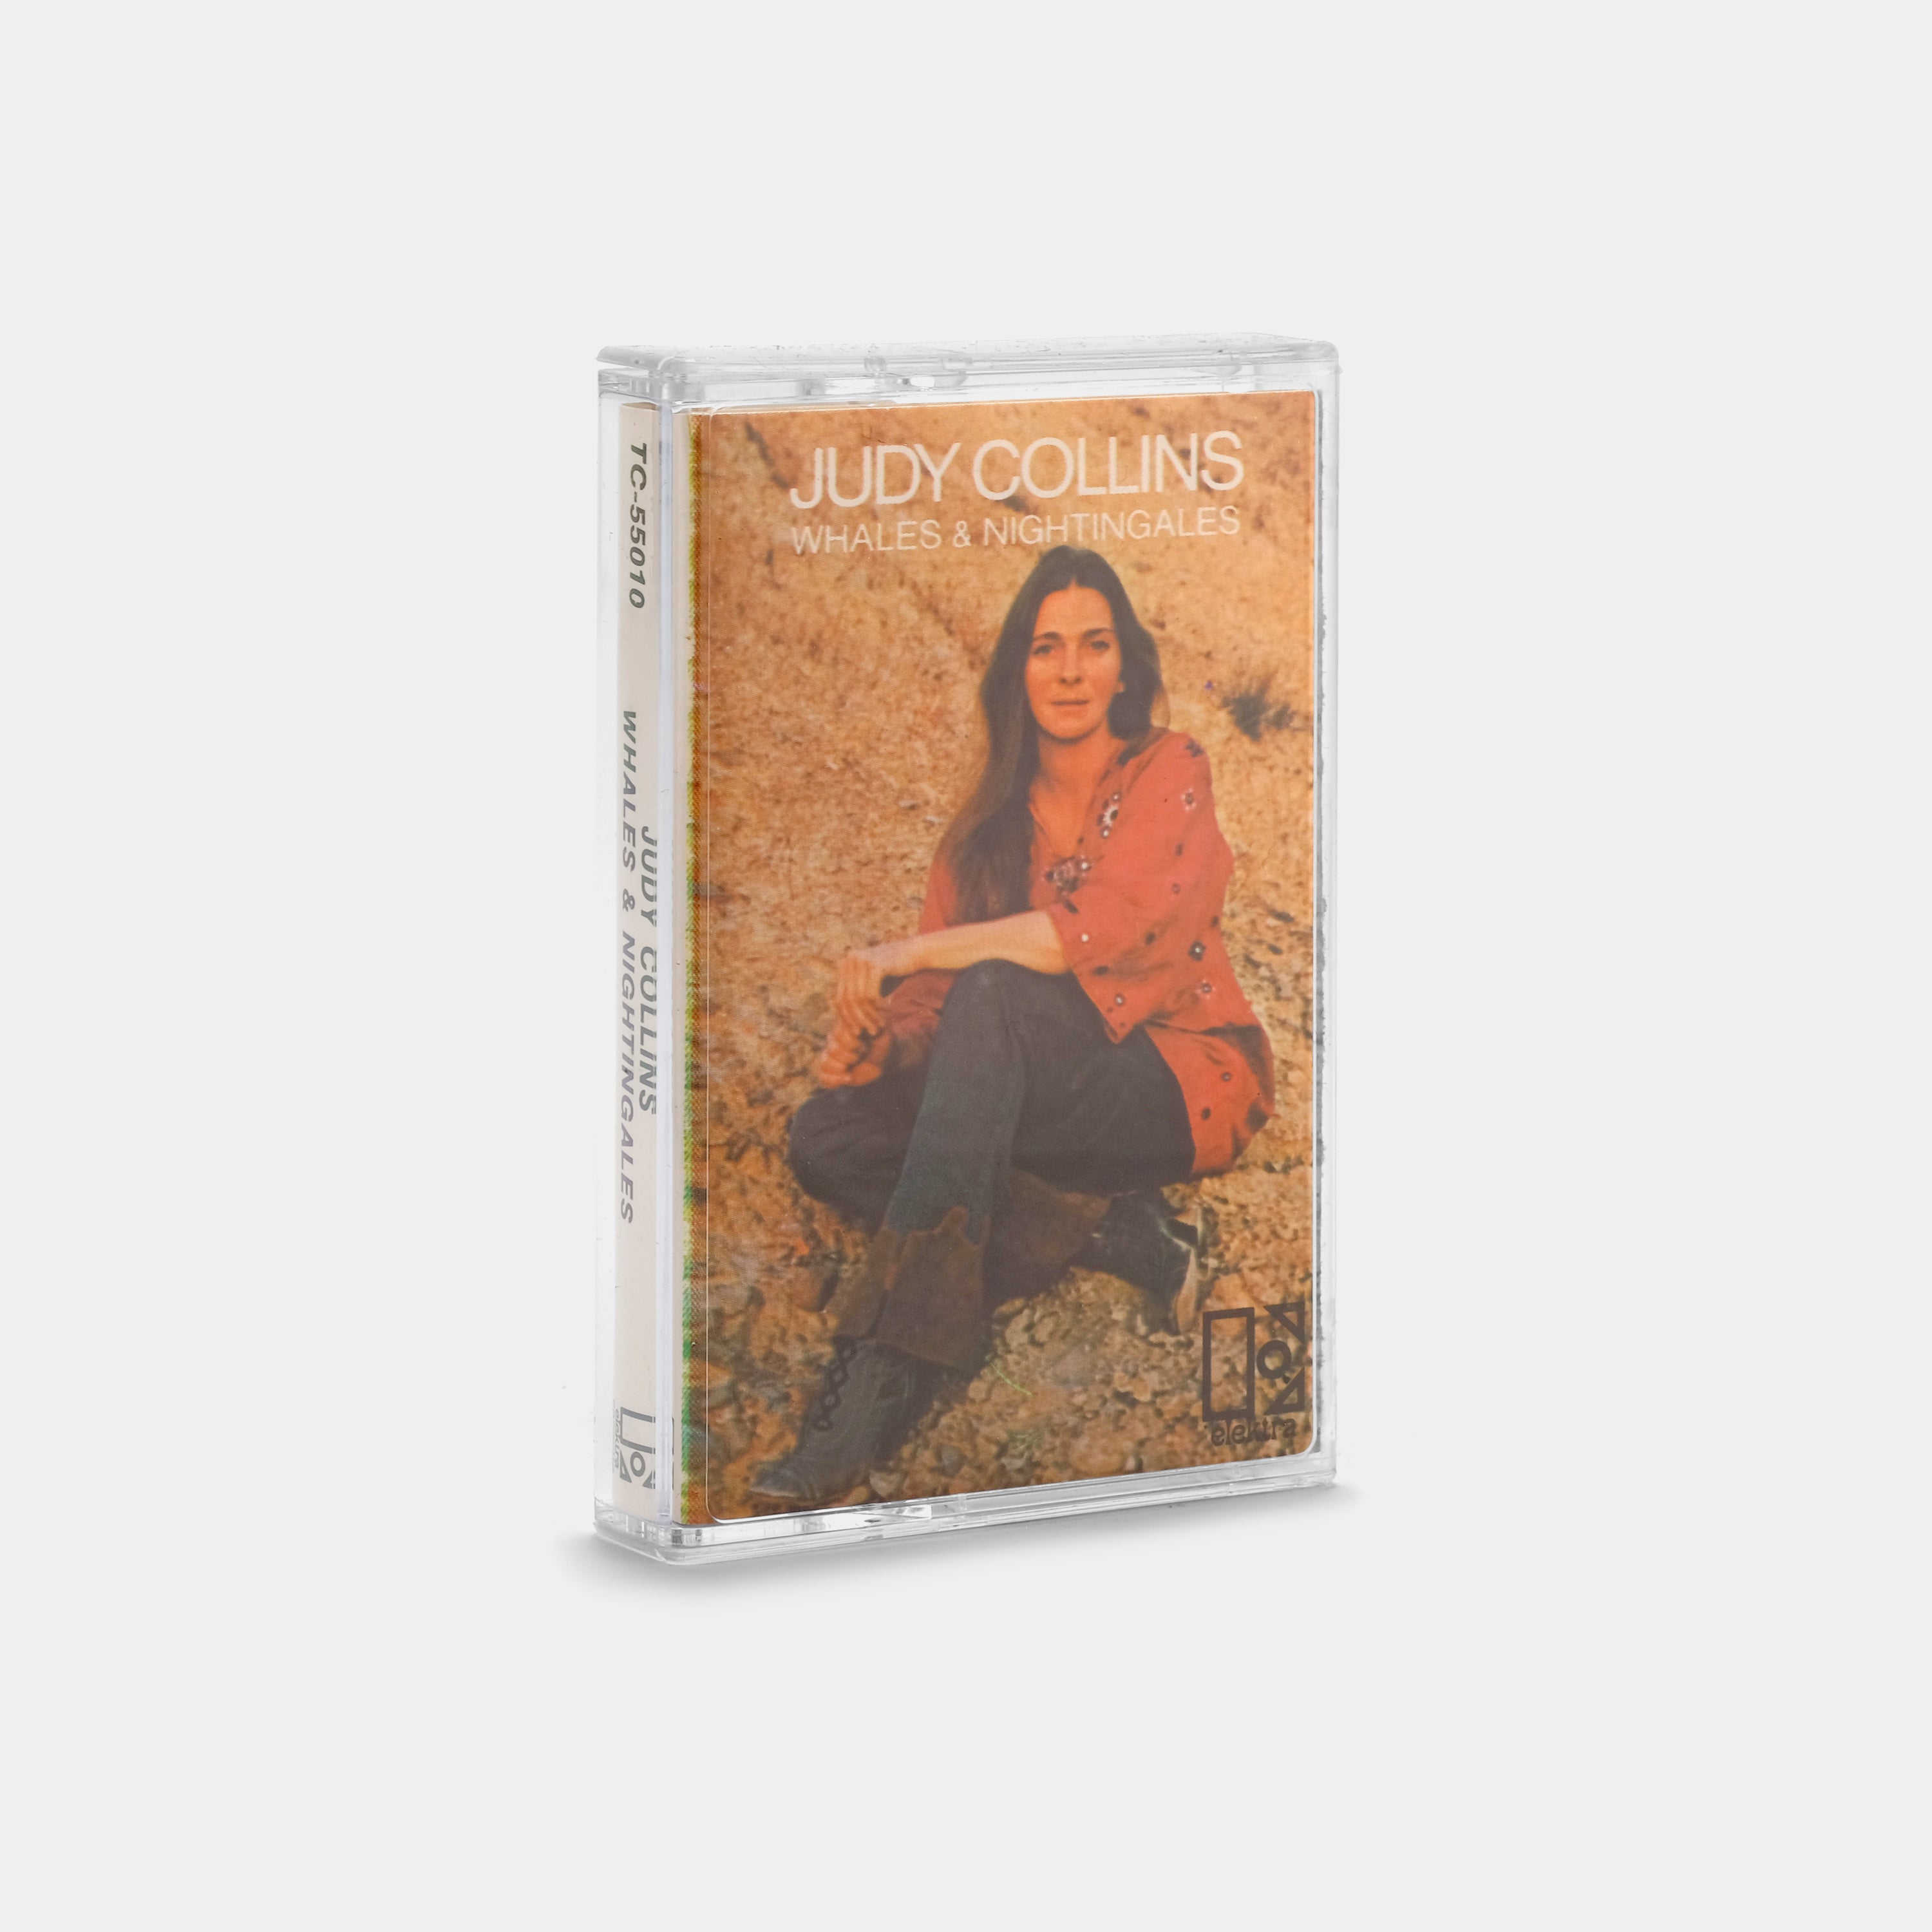 Judy Collins - Whales & Nightingales Cassette Tape